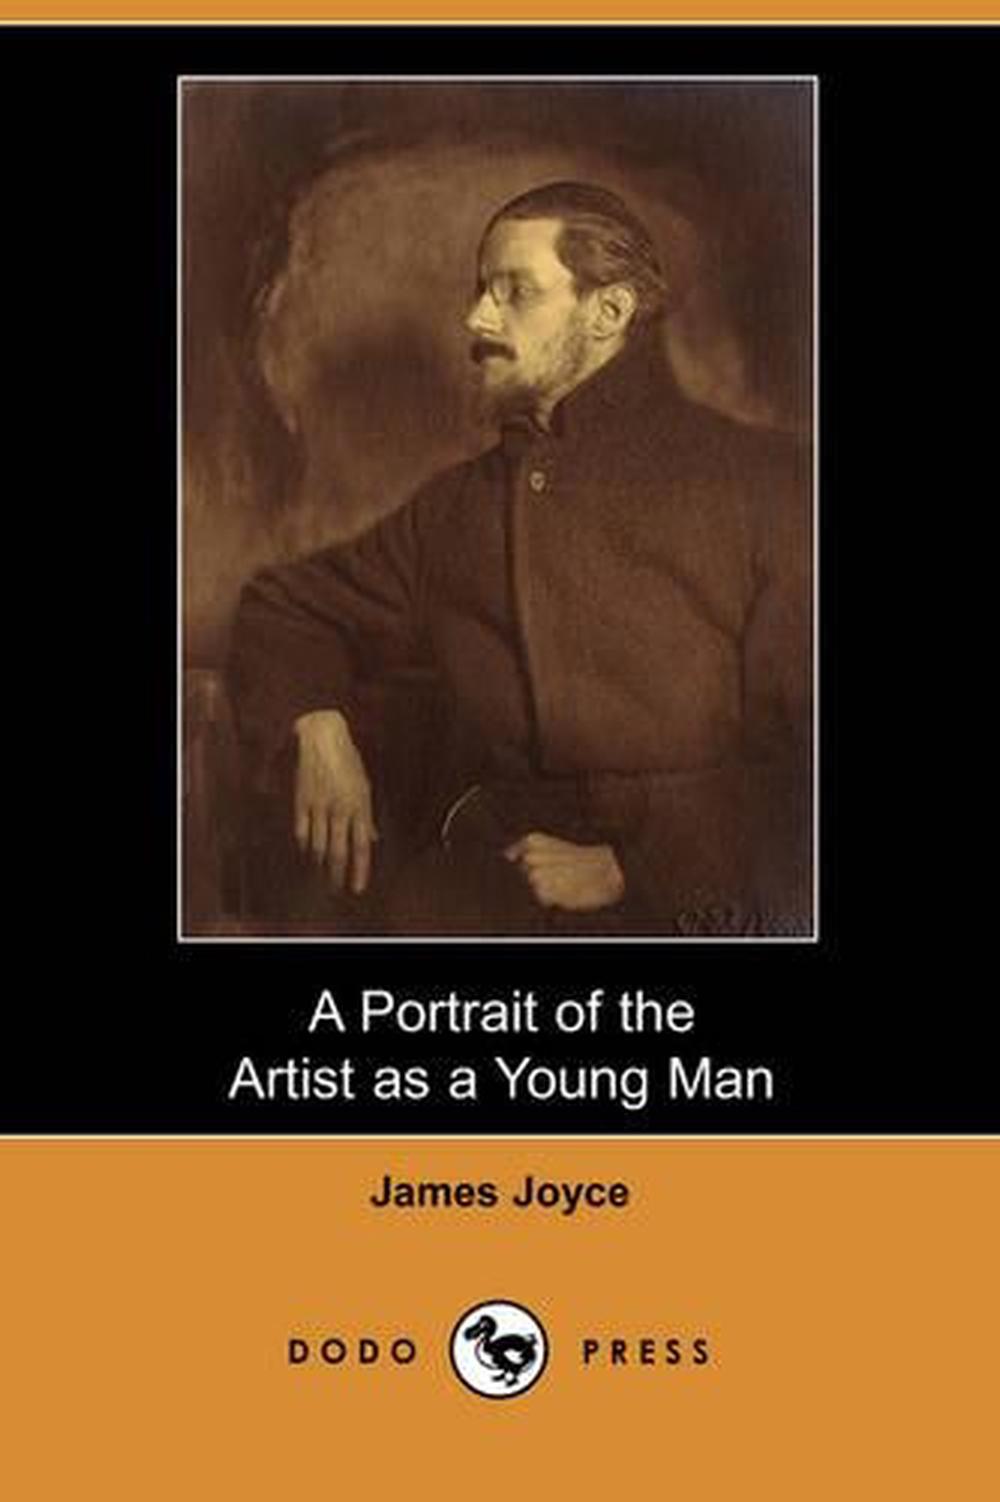 A Portrait of the Artist as a Young Man (Dodo Press) by James Joyce ...